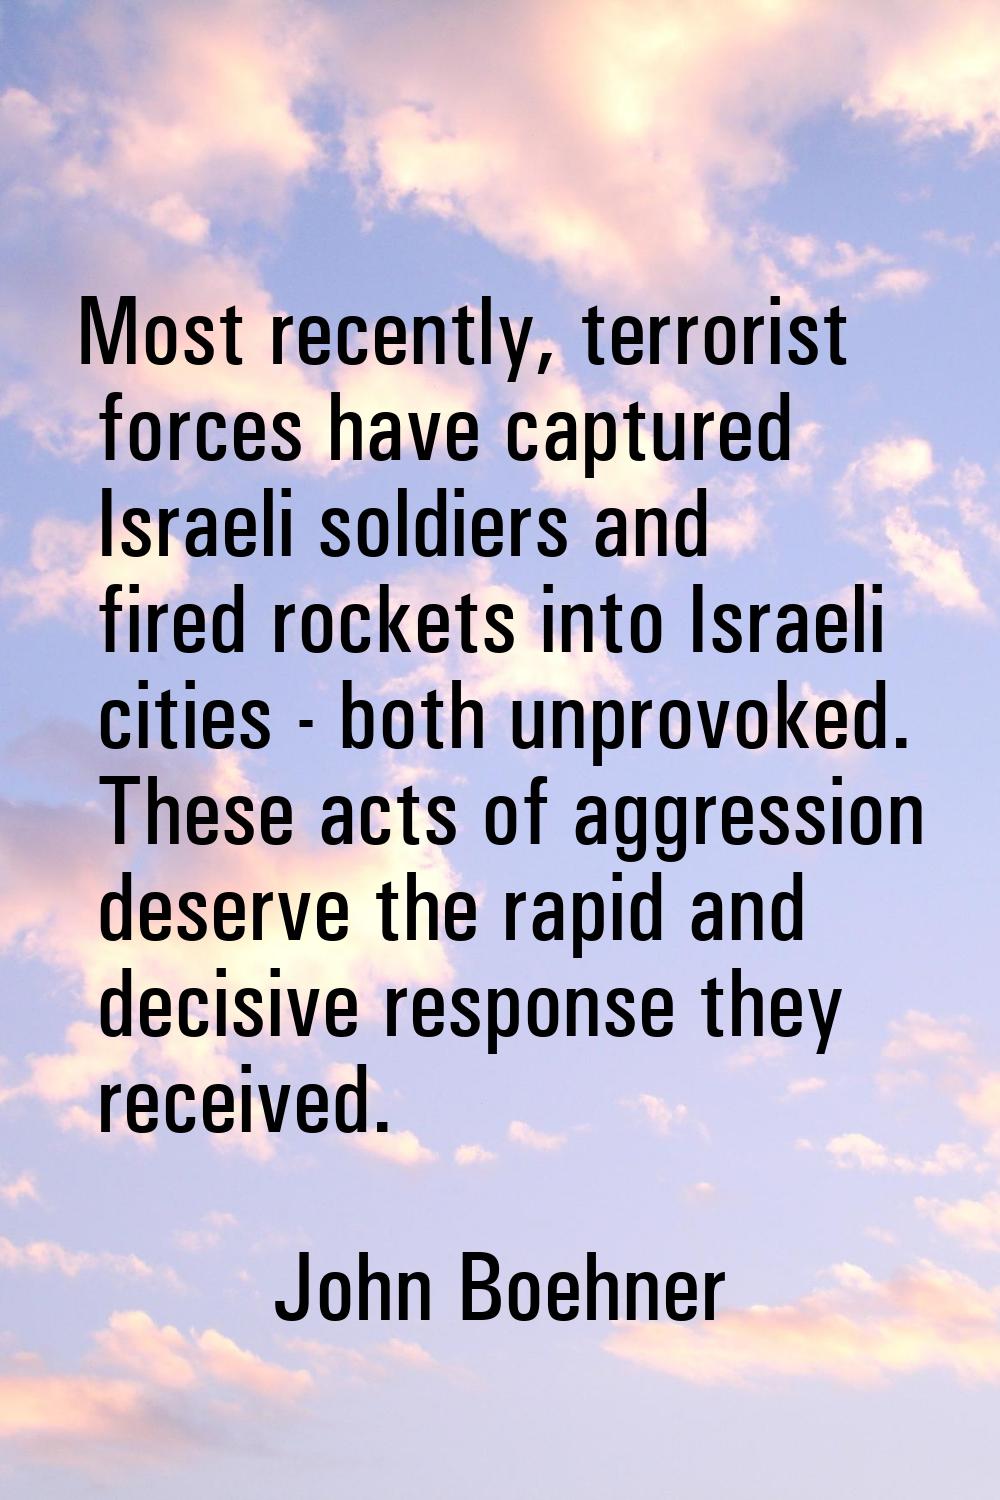 Most recently, terrorist forces have captured Israeli soldiers and fired rockets into Israeli citie